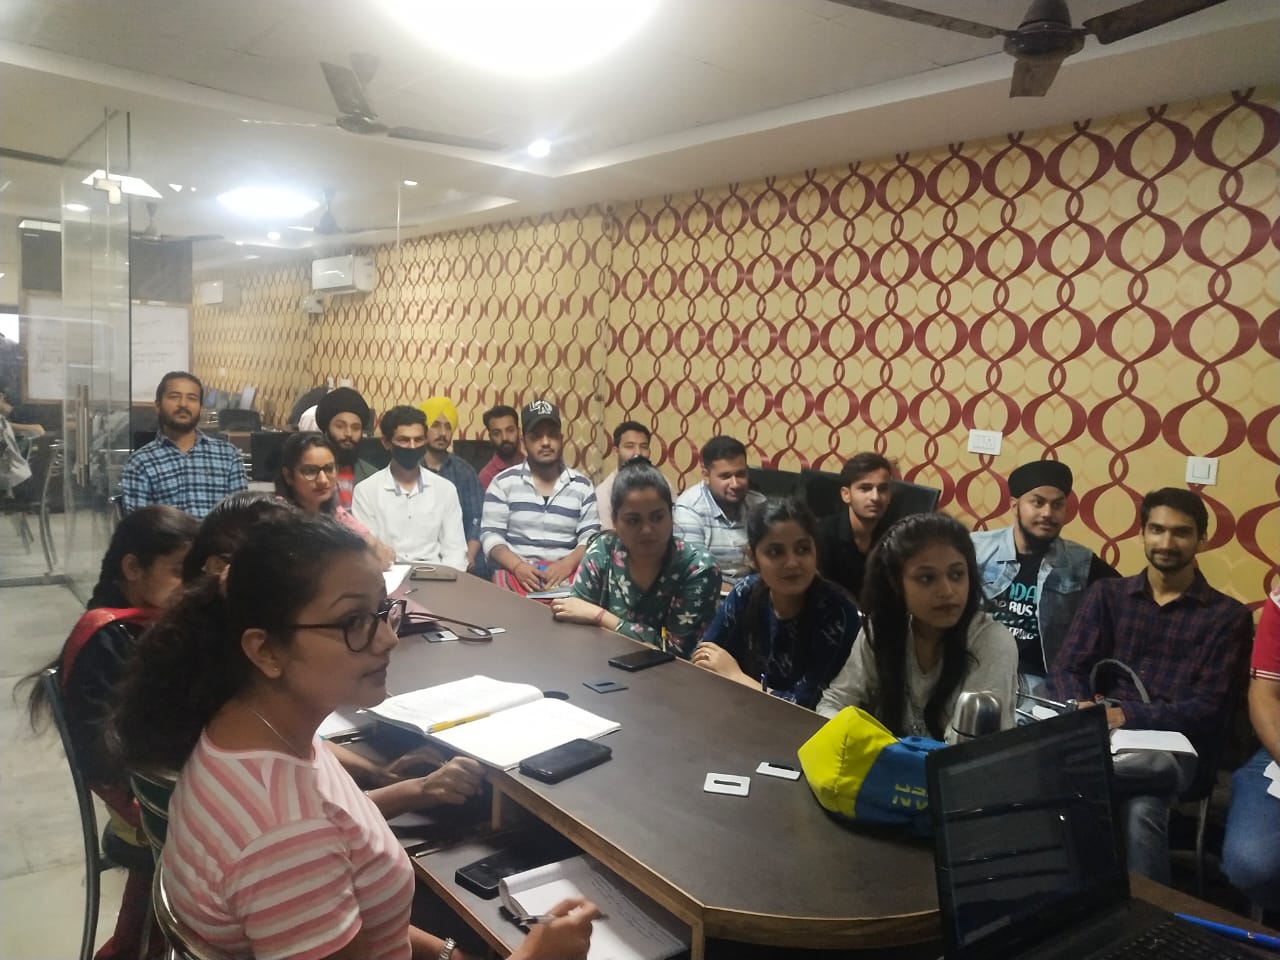 Android Training in Mohali